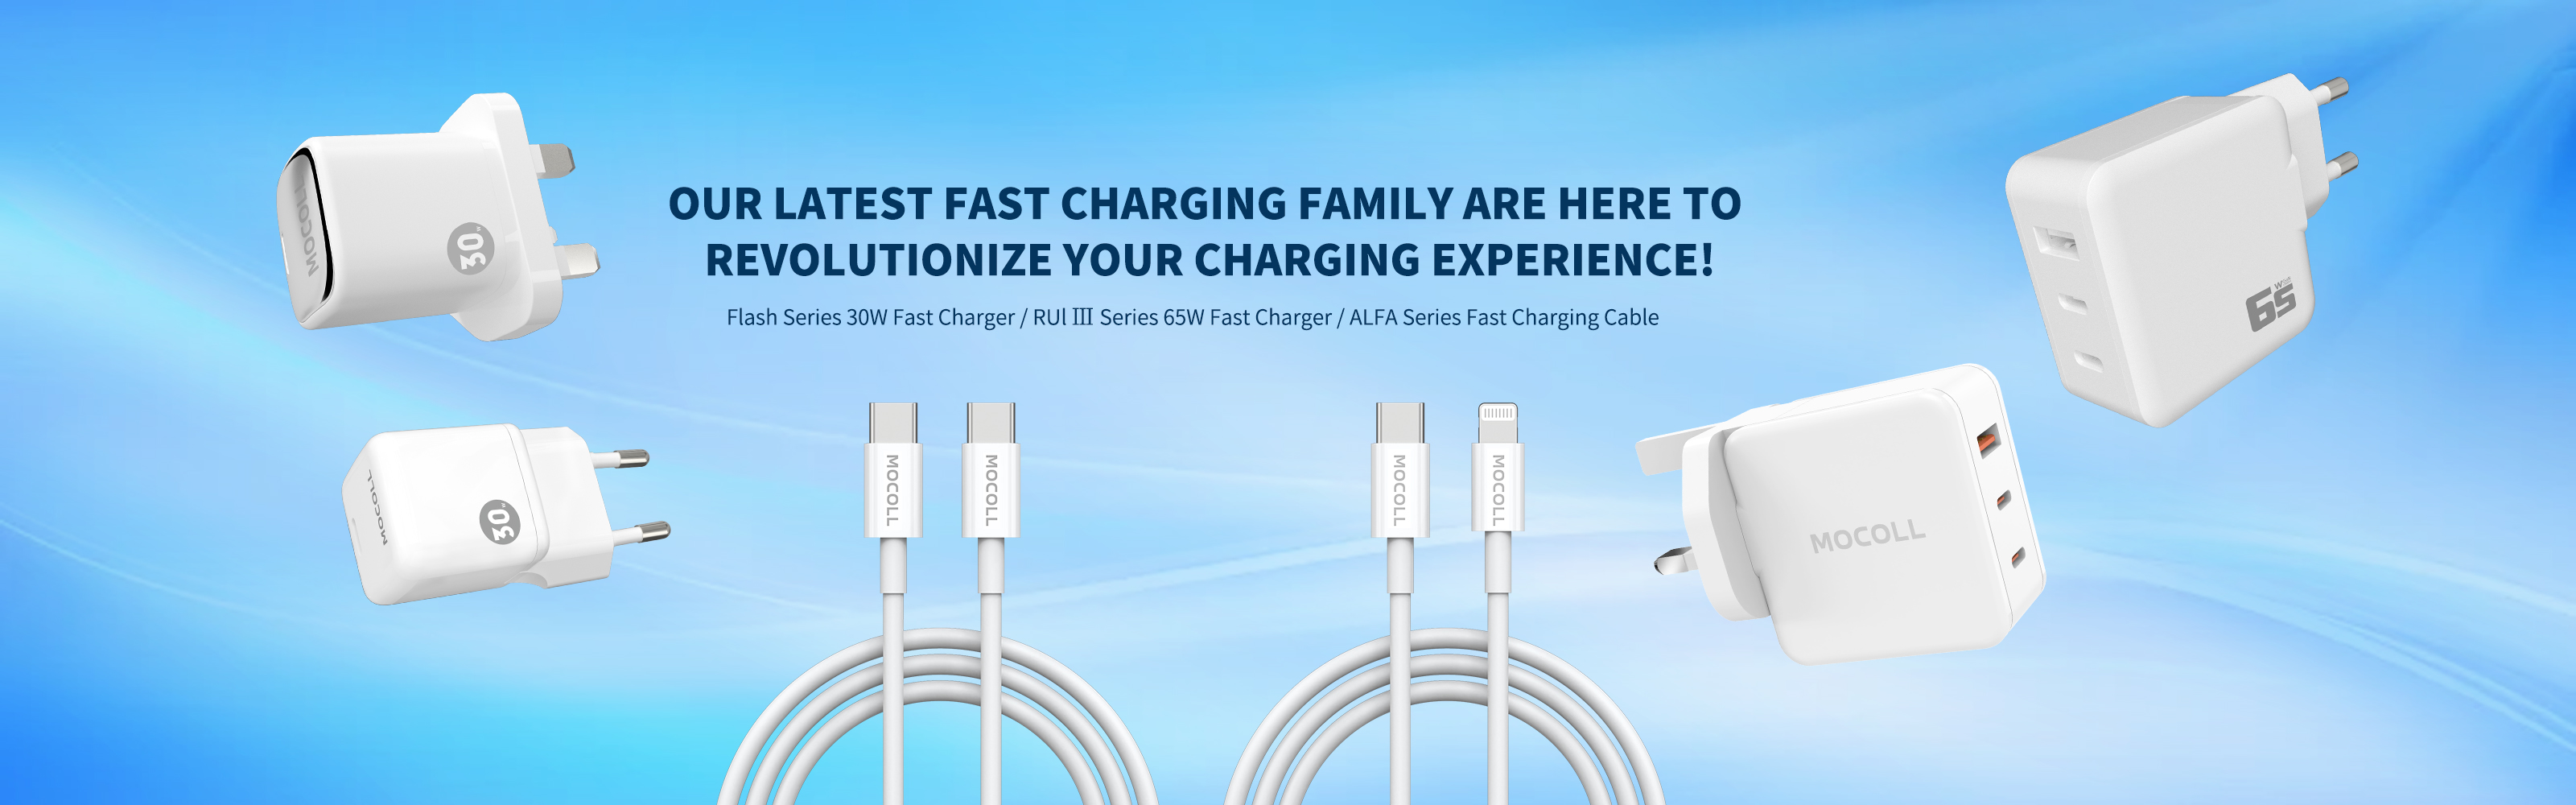 CHARGING FAMILY IS GRANDLY LAUNCHED!